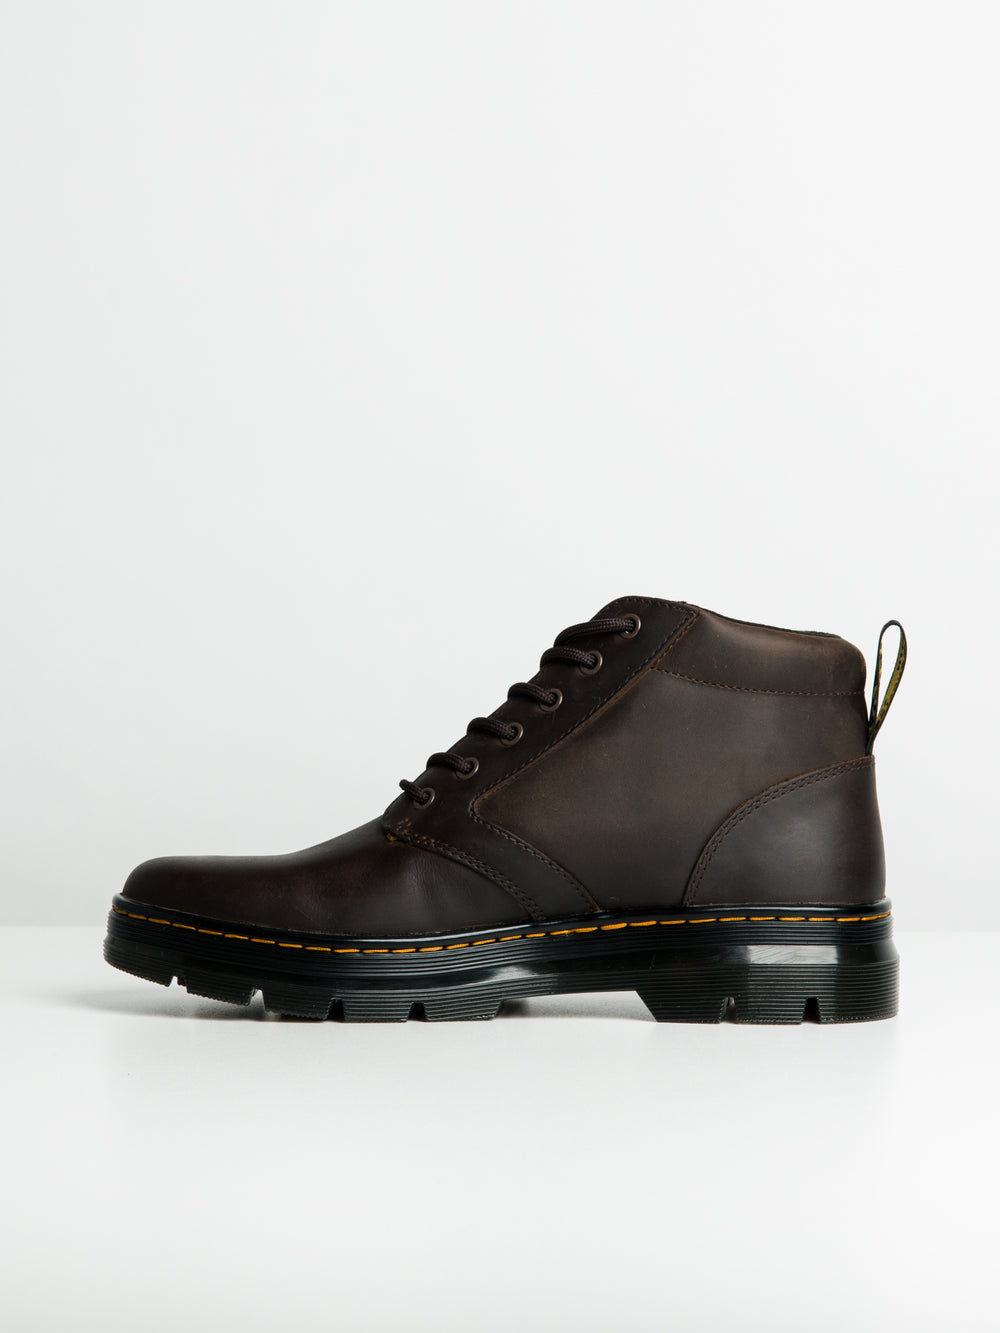 DR MARTENS BONNY LEATHER CRAZY HORSE BOOT - CLEARANCE